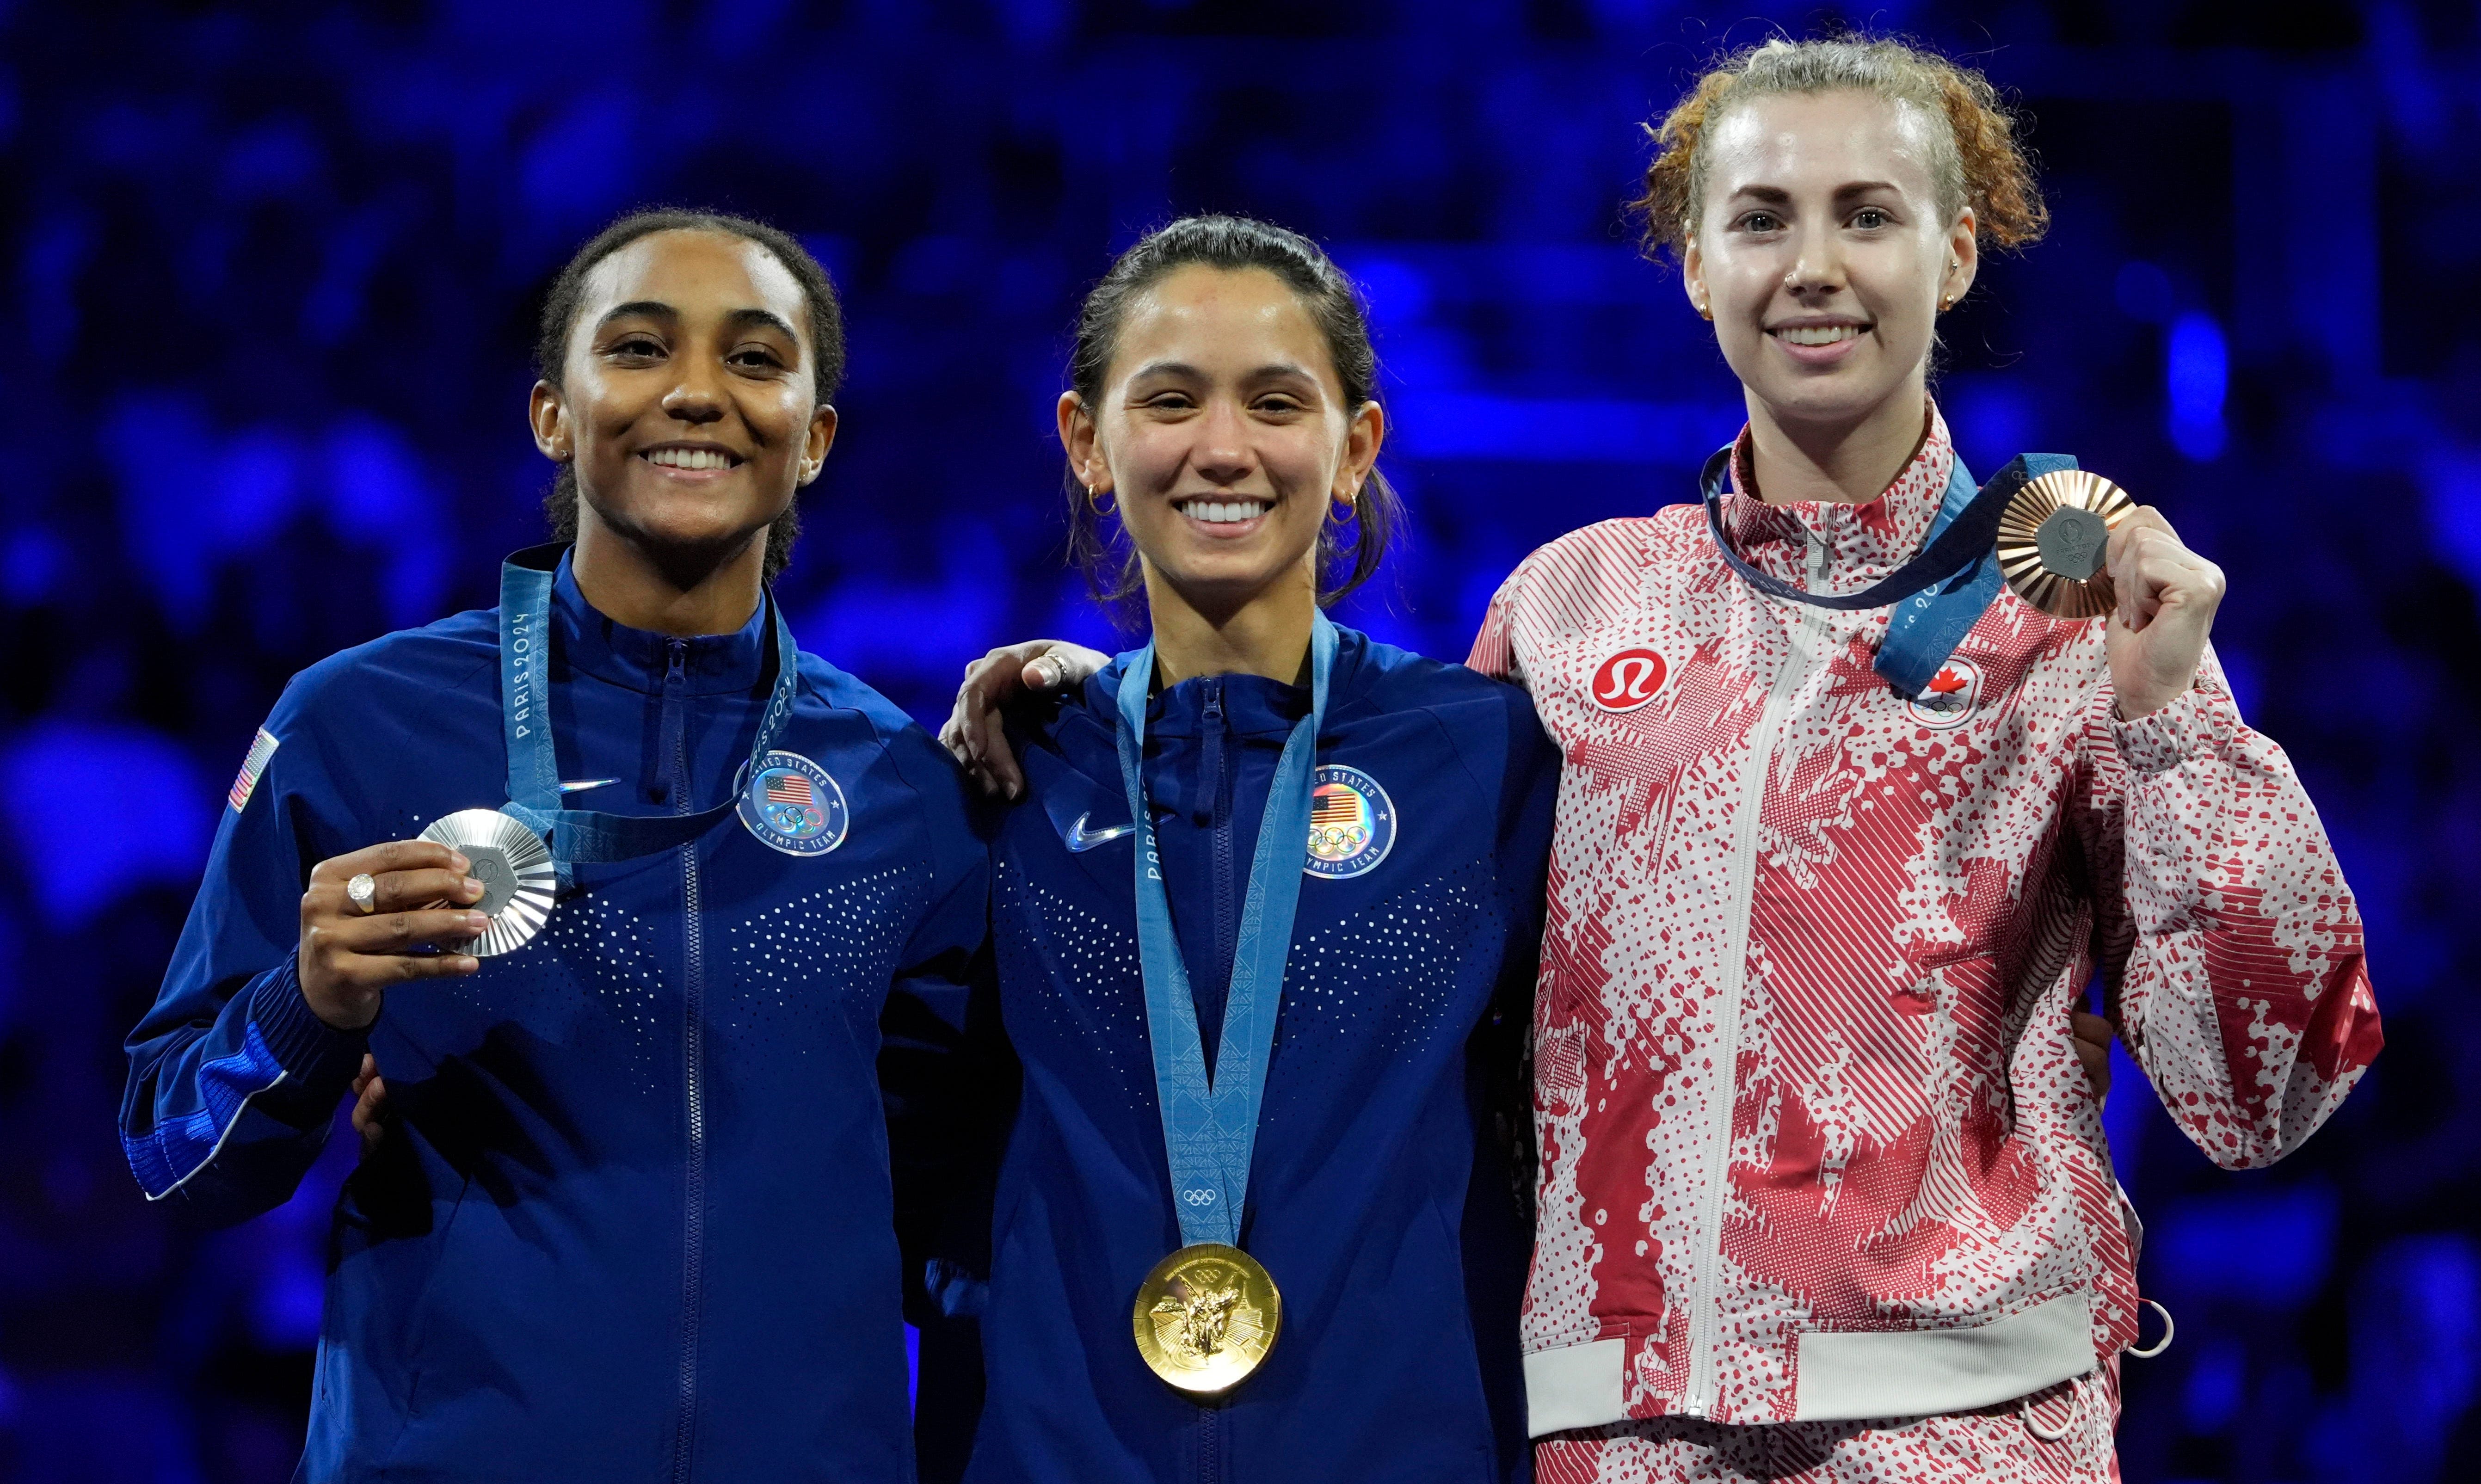 All-American women's fencing final reflects unique path for two Olympic medalists